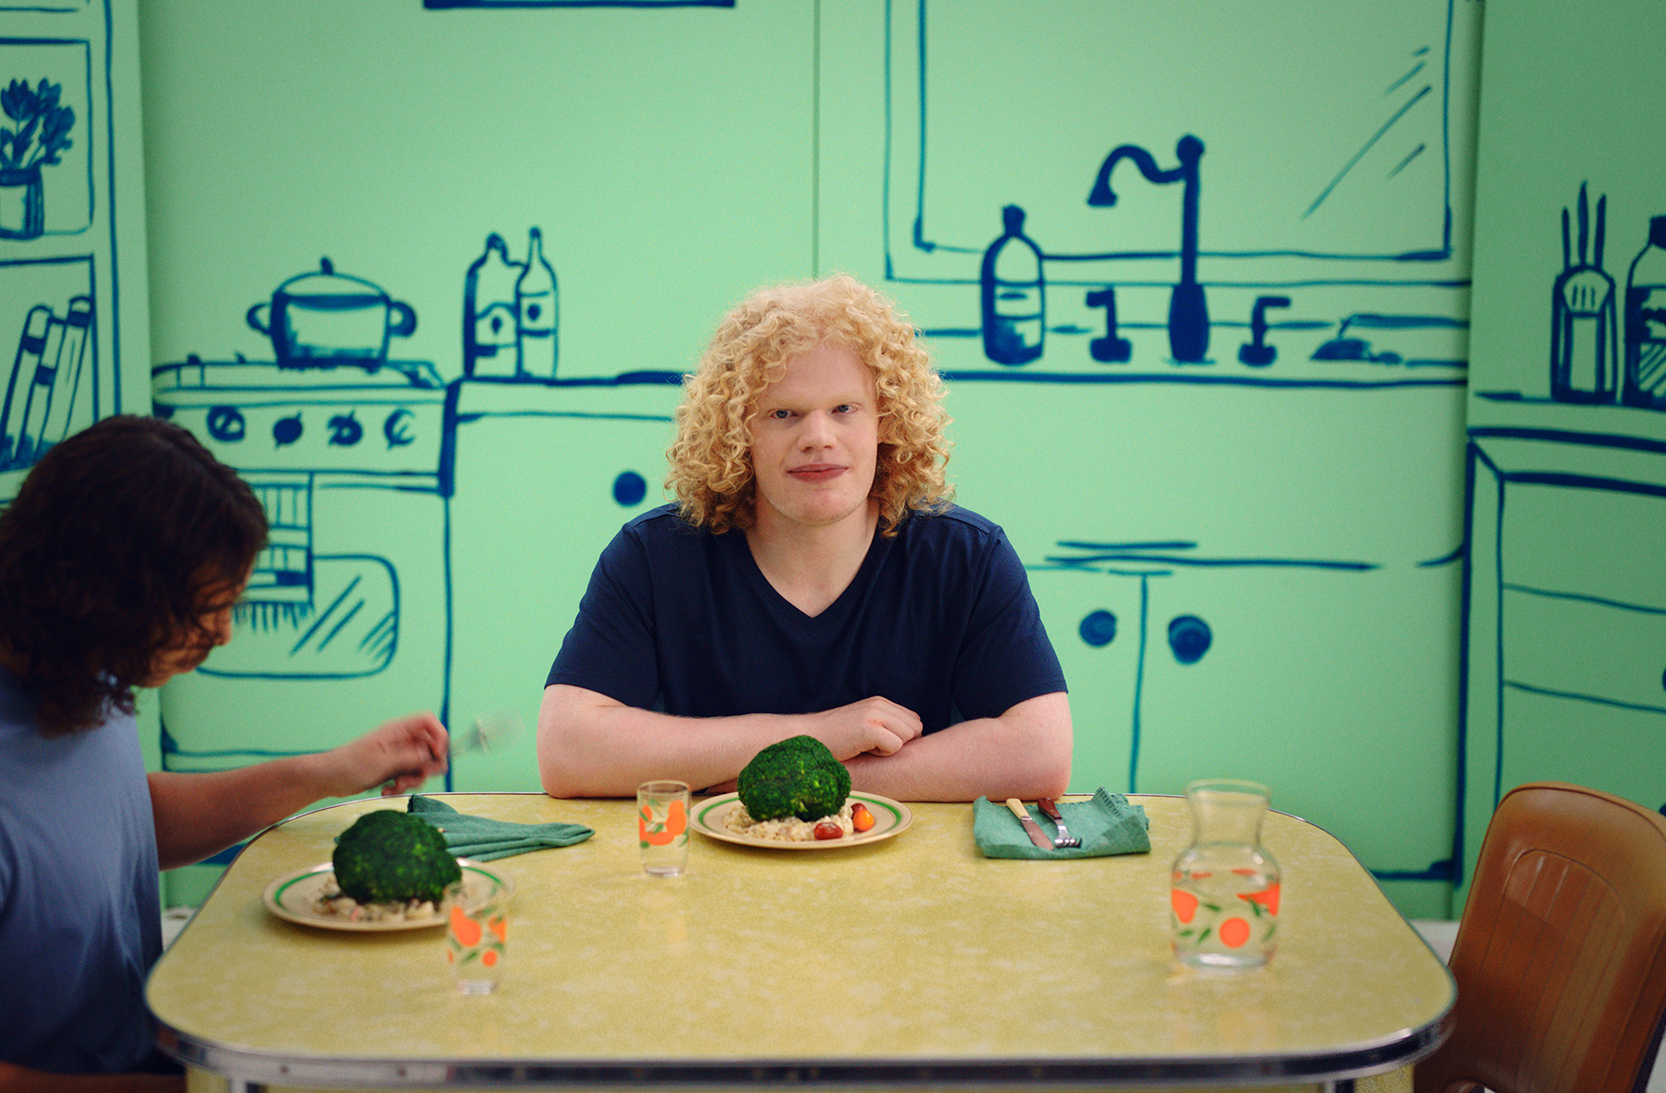 Two young men sit at a kitchen table with plates of broccoli pasta in front of them. A blonde man in a navy t-shirt is looking directly at camera with his arms folded on the table. A brunette man in a blue t-shirt is looking down at his plate with a fork in his hand. They are in front of a green and navy painted kitchen scene.